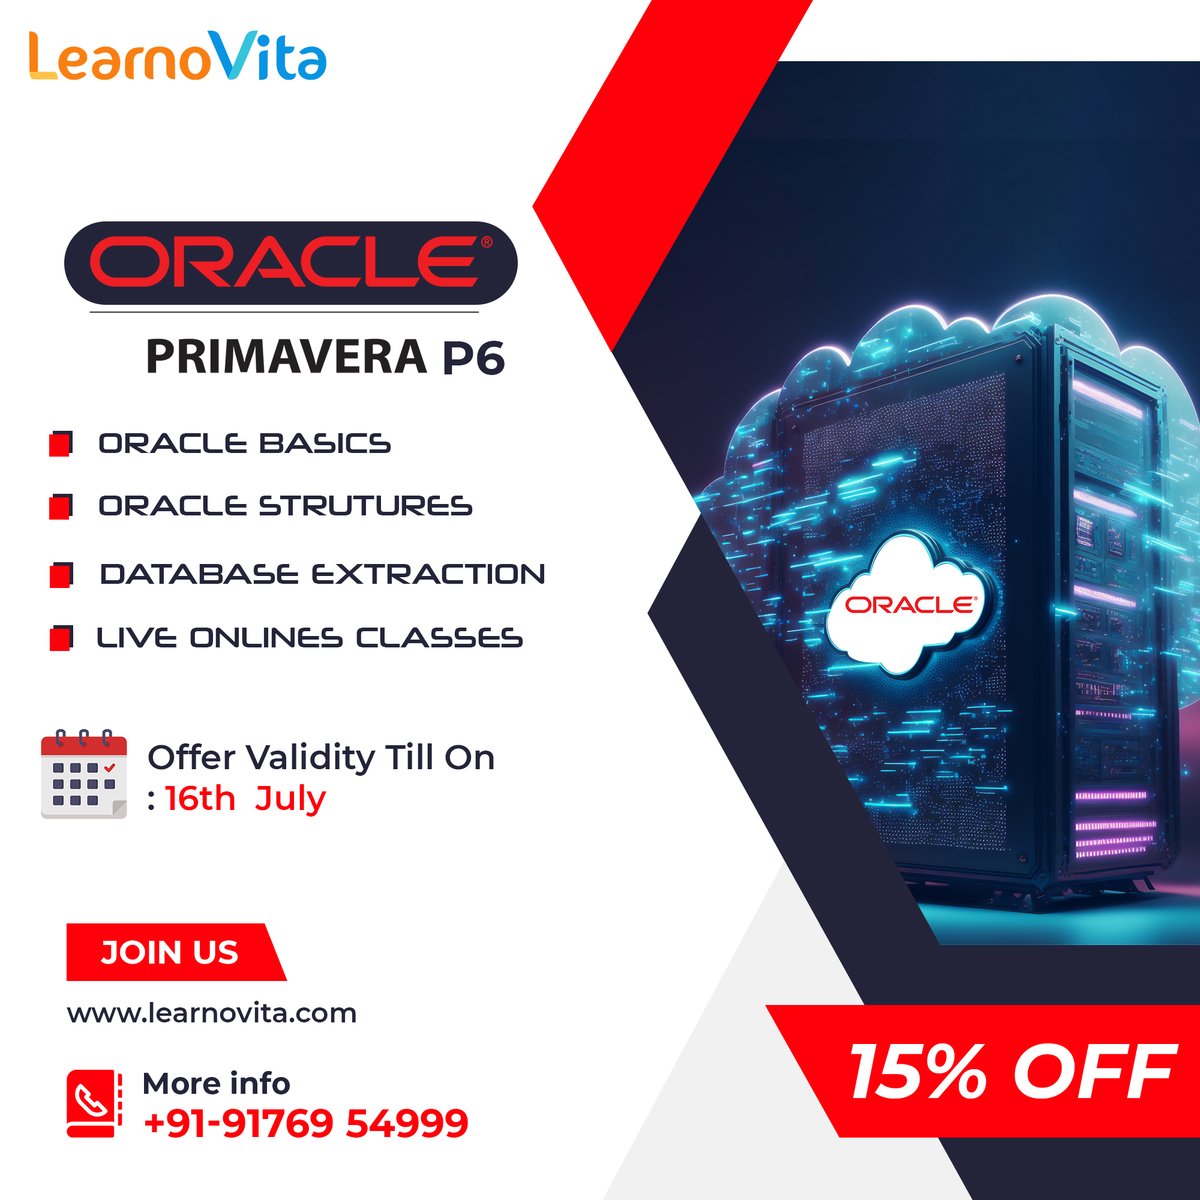 Oracle Primavera P6 streamlines project management, boosting productivity, resource utilization, and ensuring project success. Click Here👉learnovita.com #PrimaveraP6 #PrimaveraP6Software #P6ProjectManagement #PrimaveraPlanning #ProjectScheduling